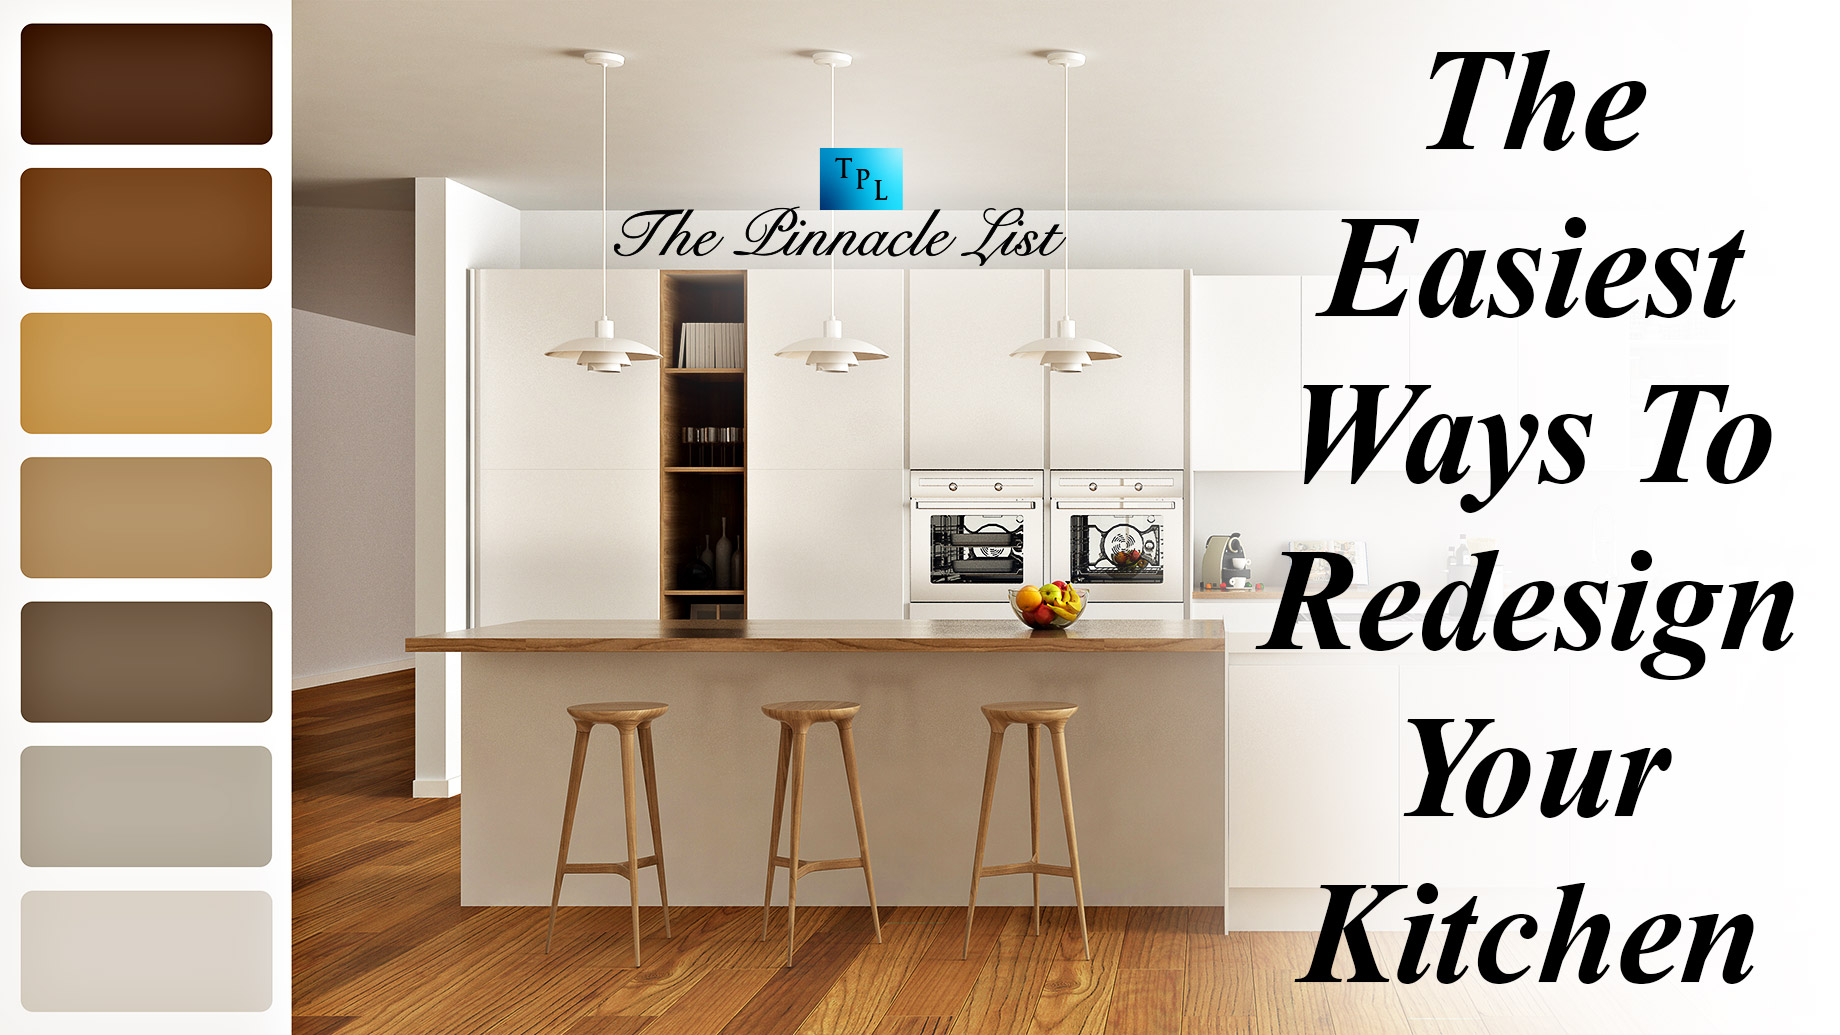 The Easiest Ways To Redesign Your Kitchen